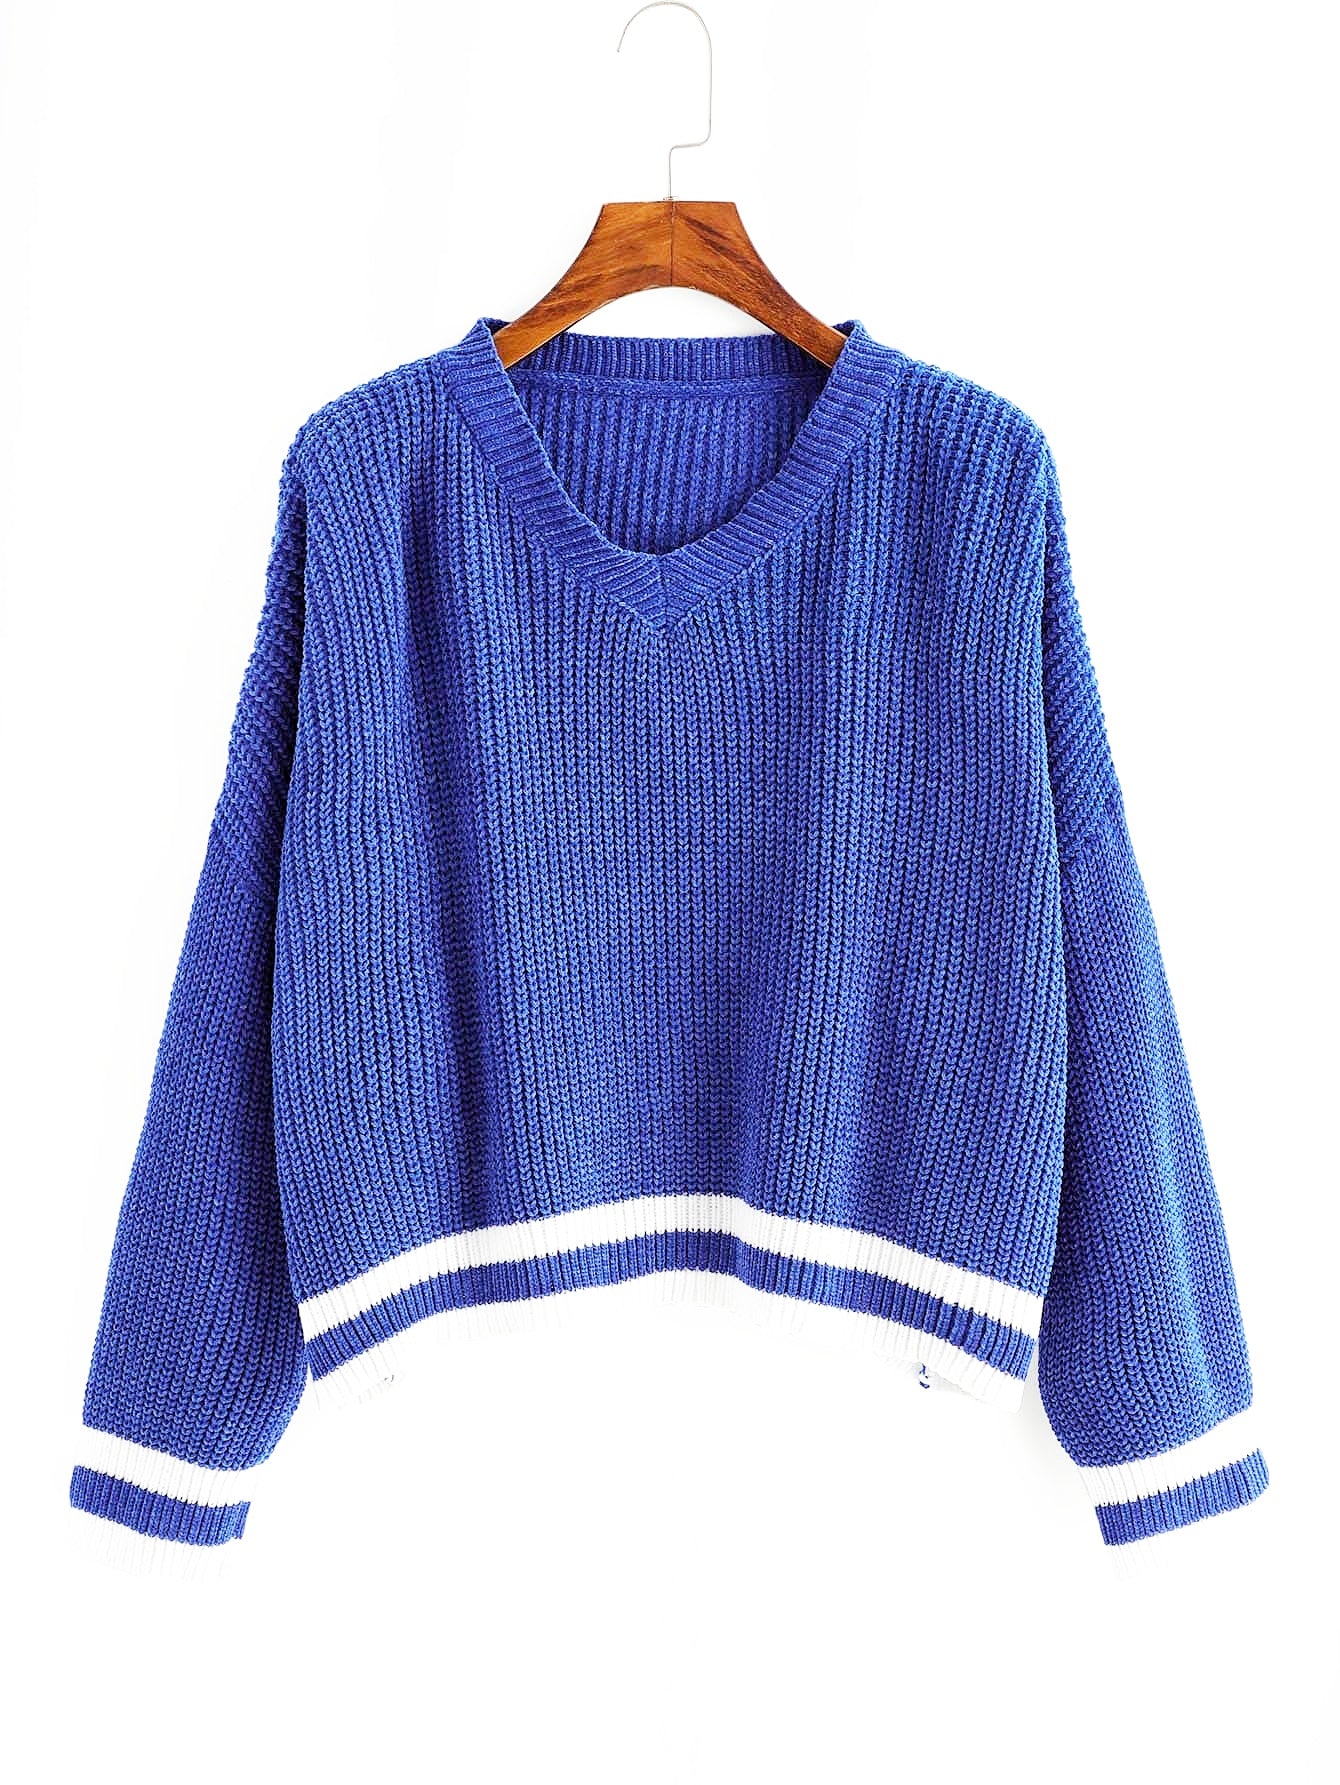 Kinley Cropped Pullover Sweater - Didi Royale